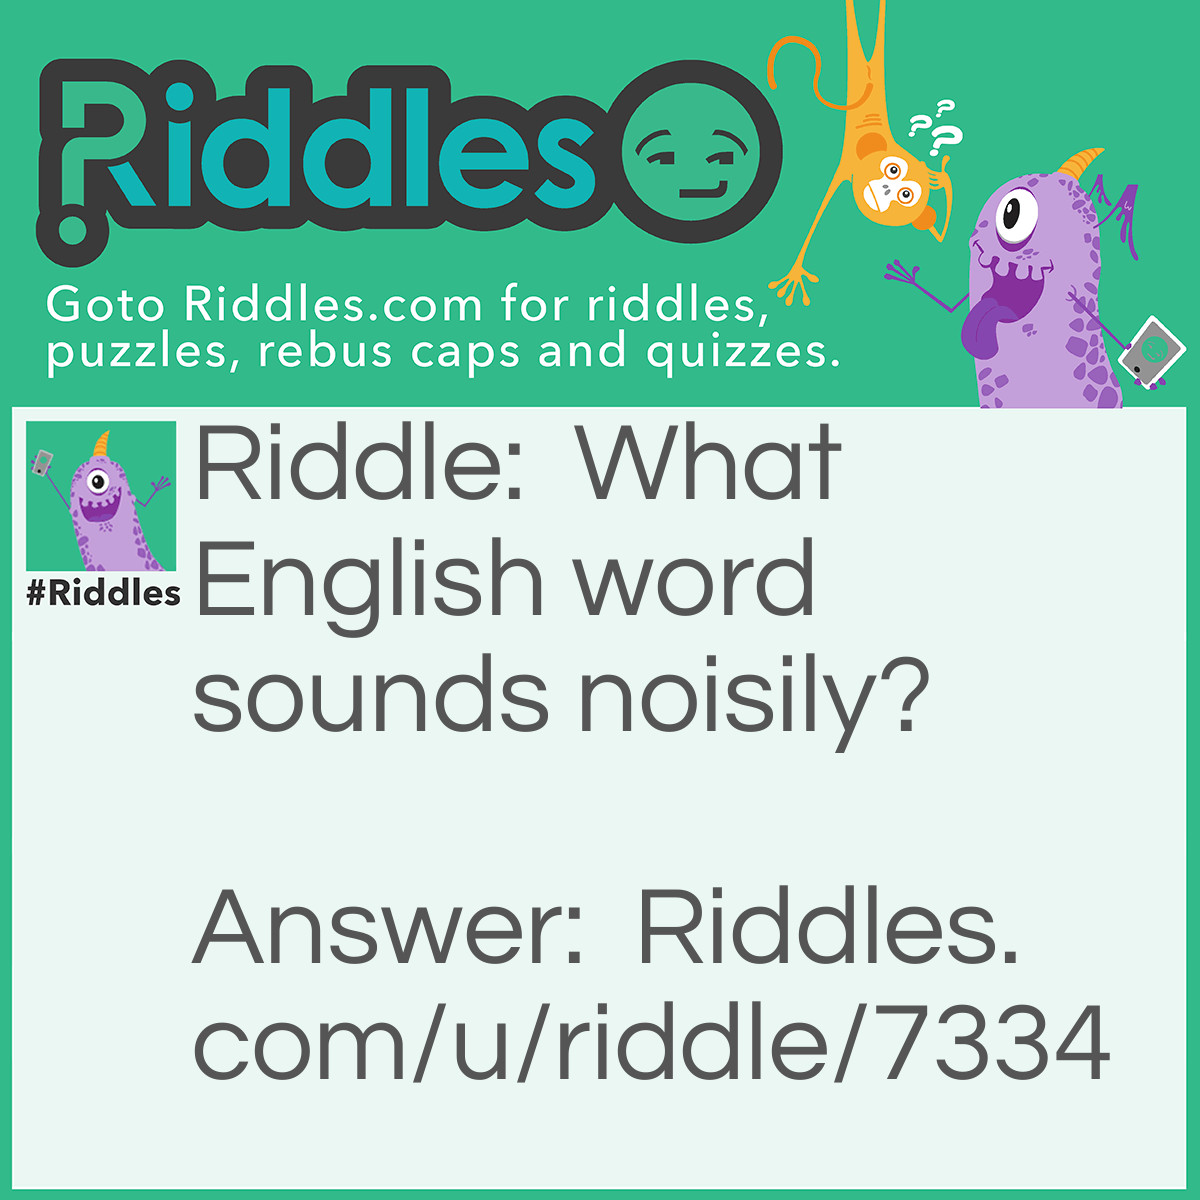 Riddle: What English word sounds noisily? Answer: NOISILY, of course!